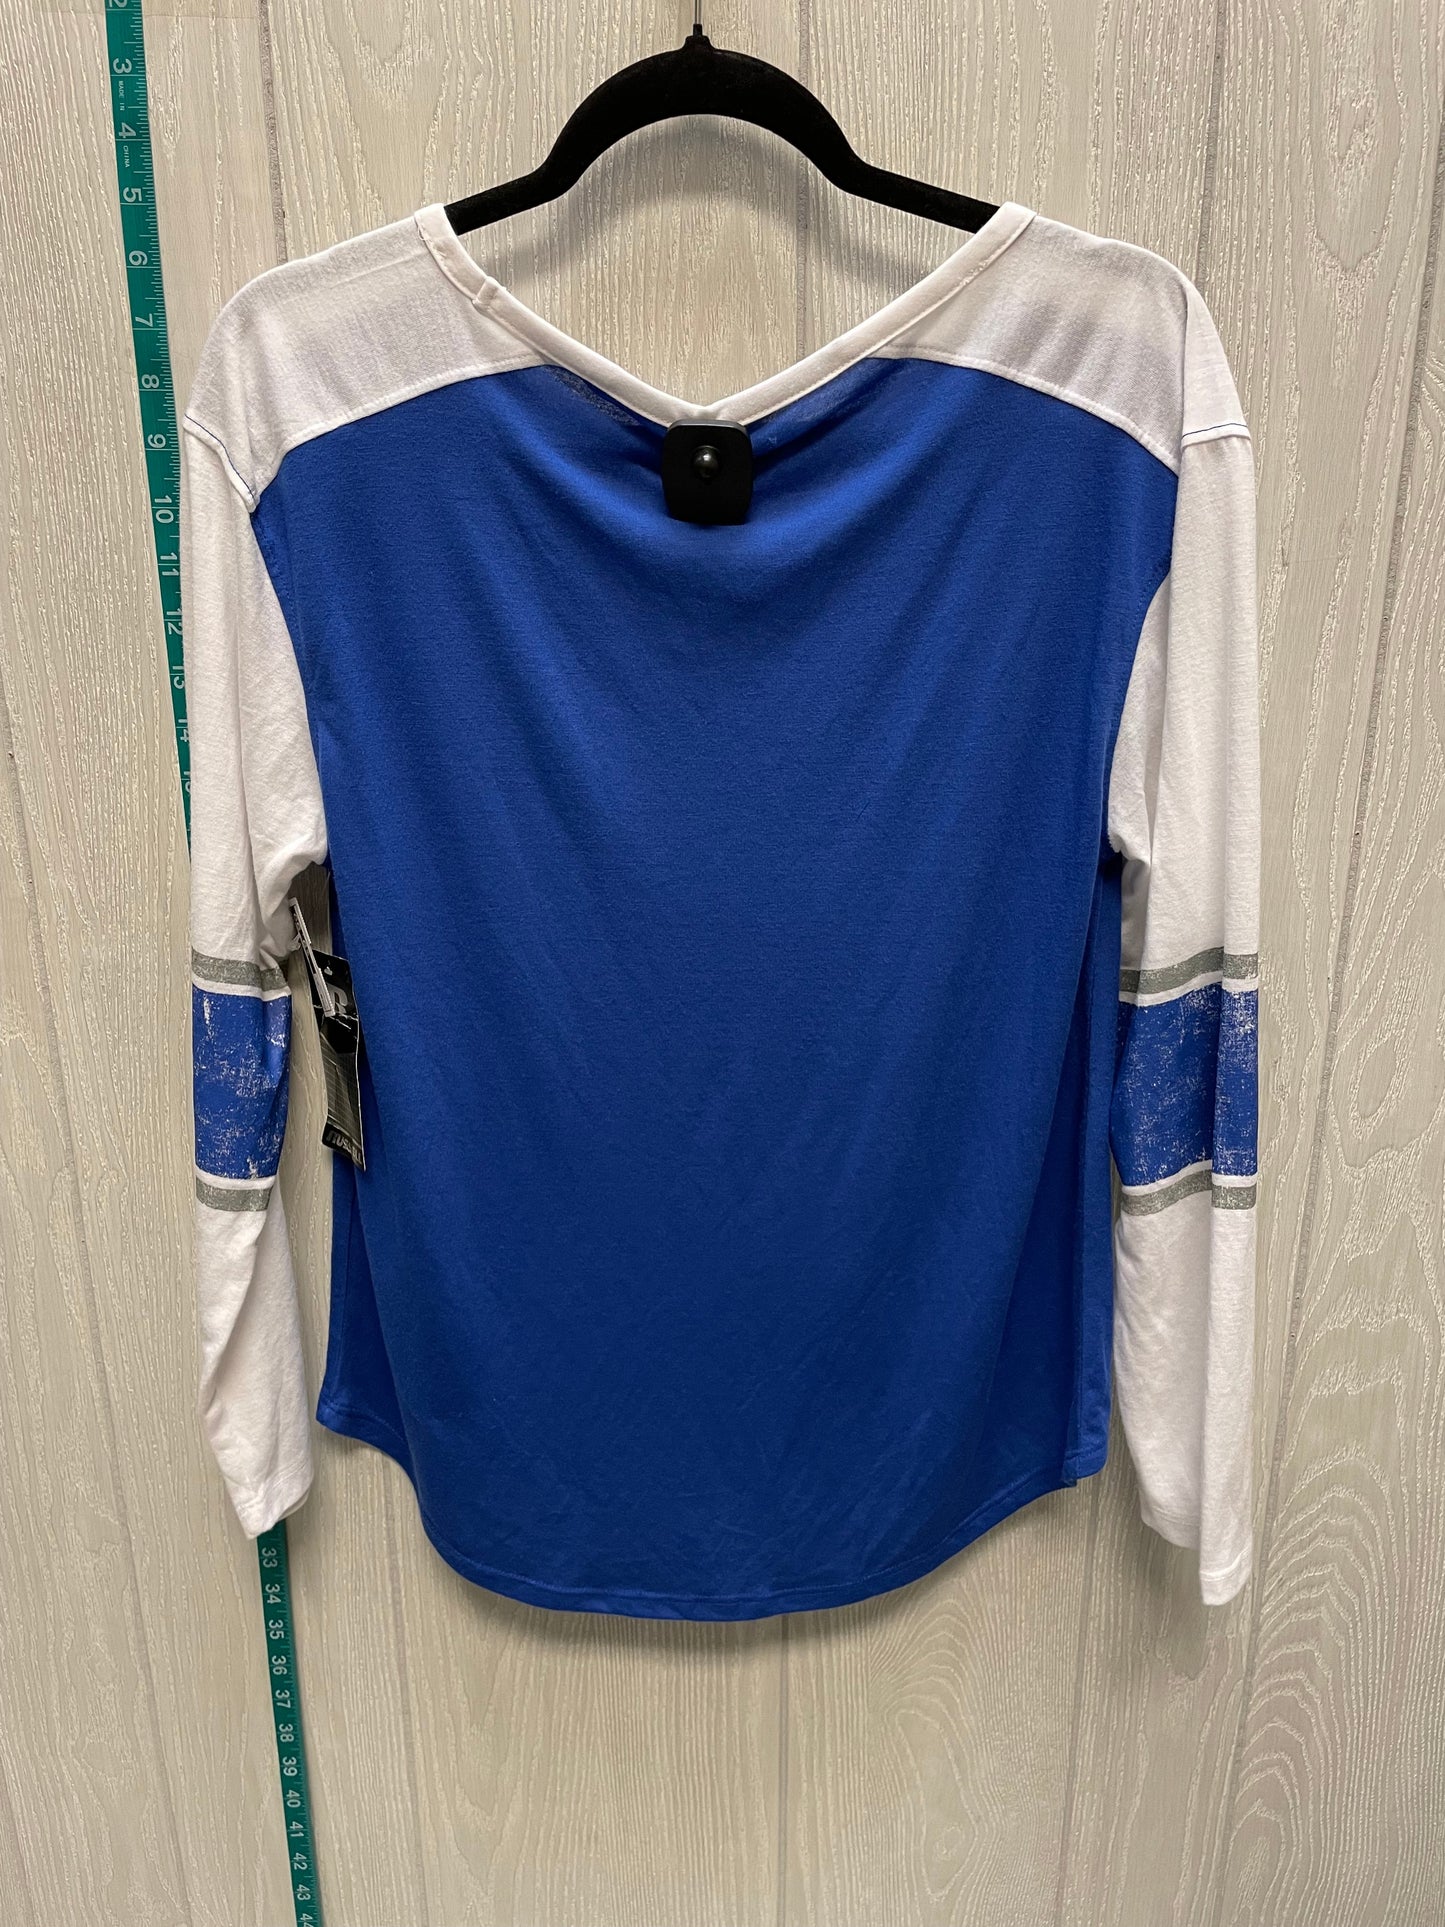 Blue & White Top 3/4 Sleeve Russel Athletic, Size M